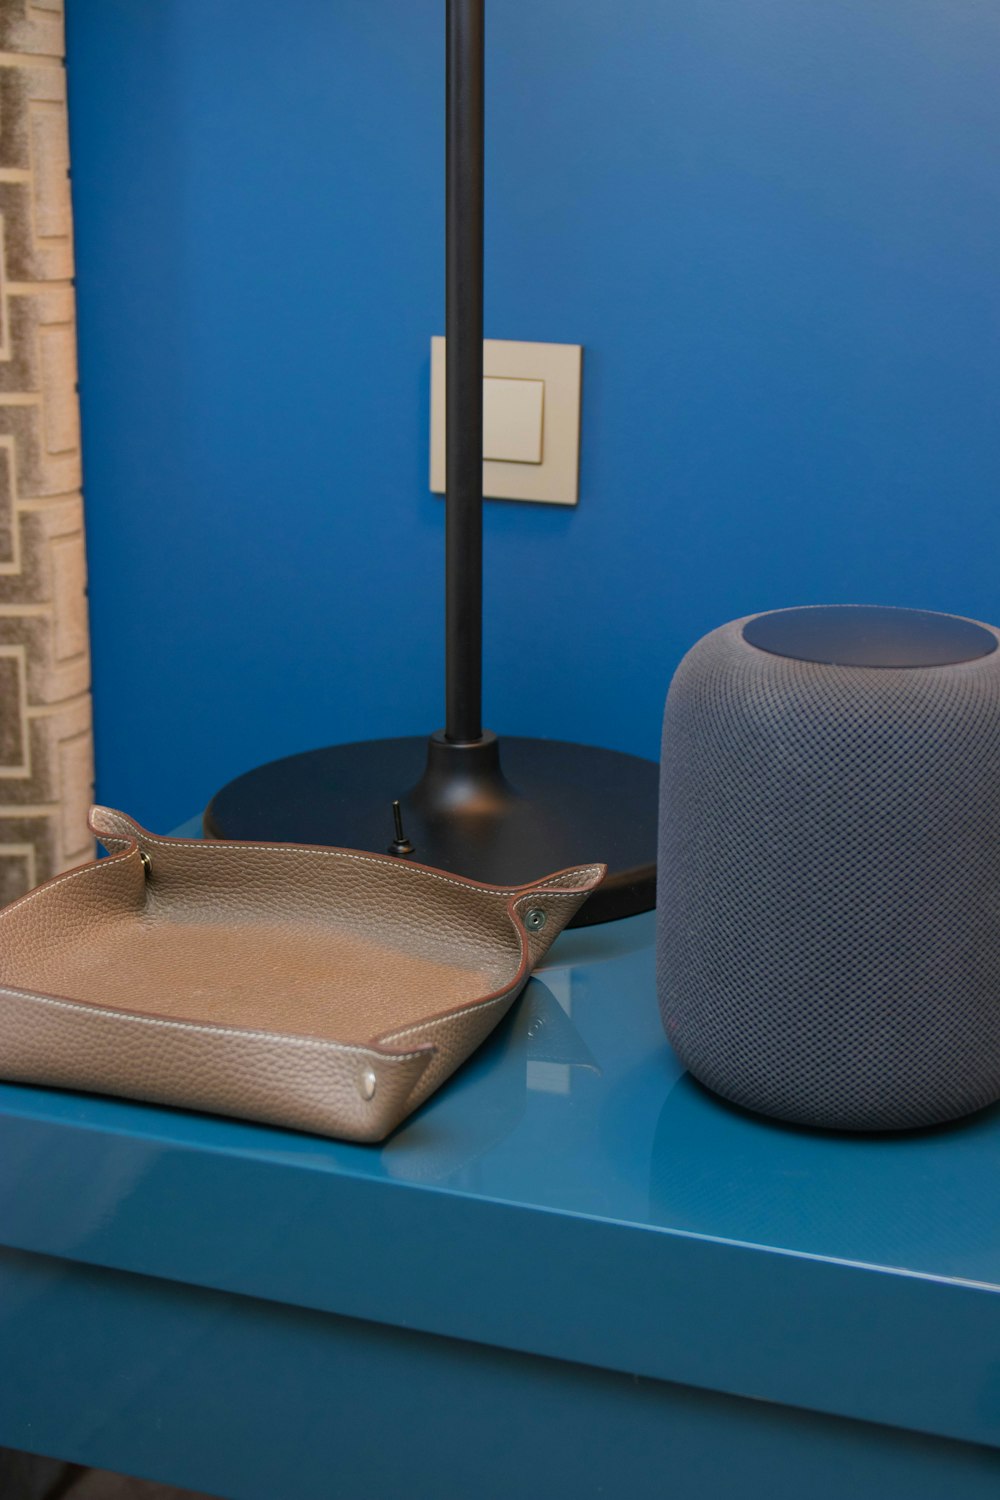 brown leather tray beside gray portable speaker and black table lamp base